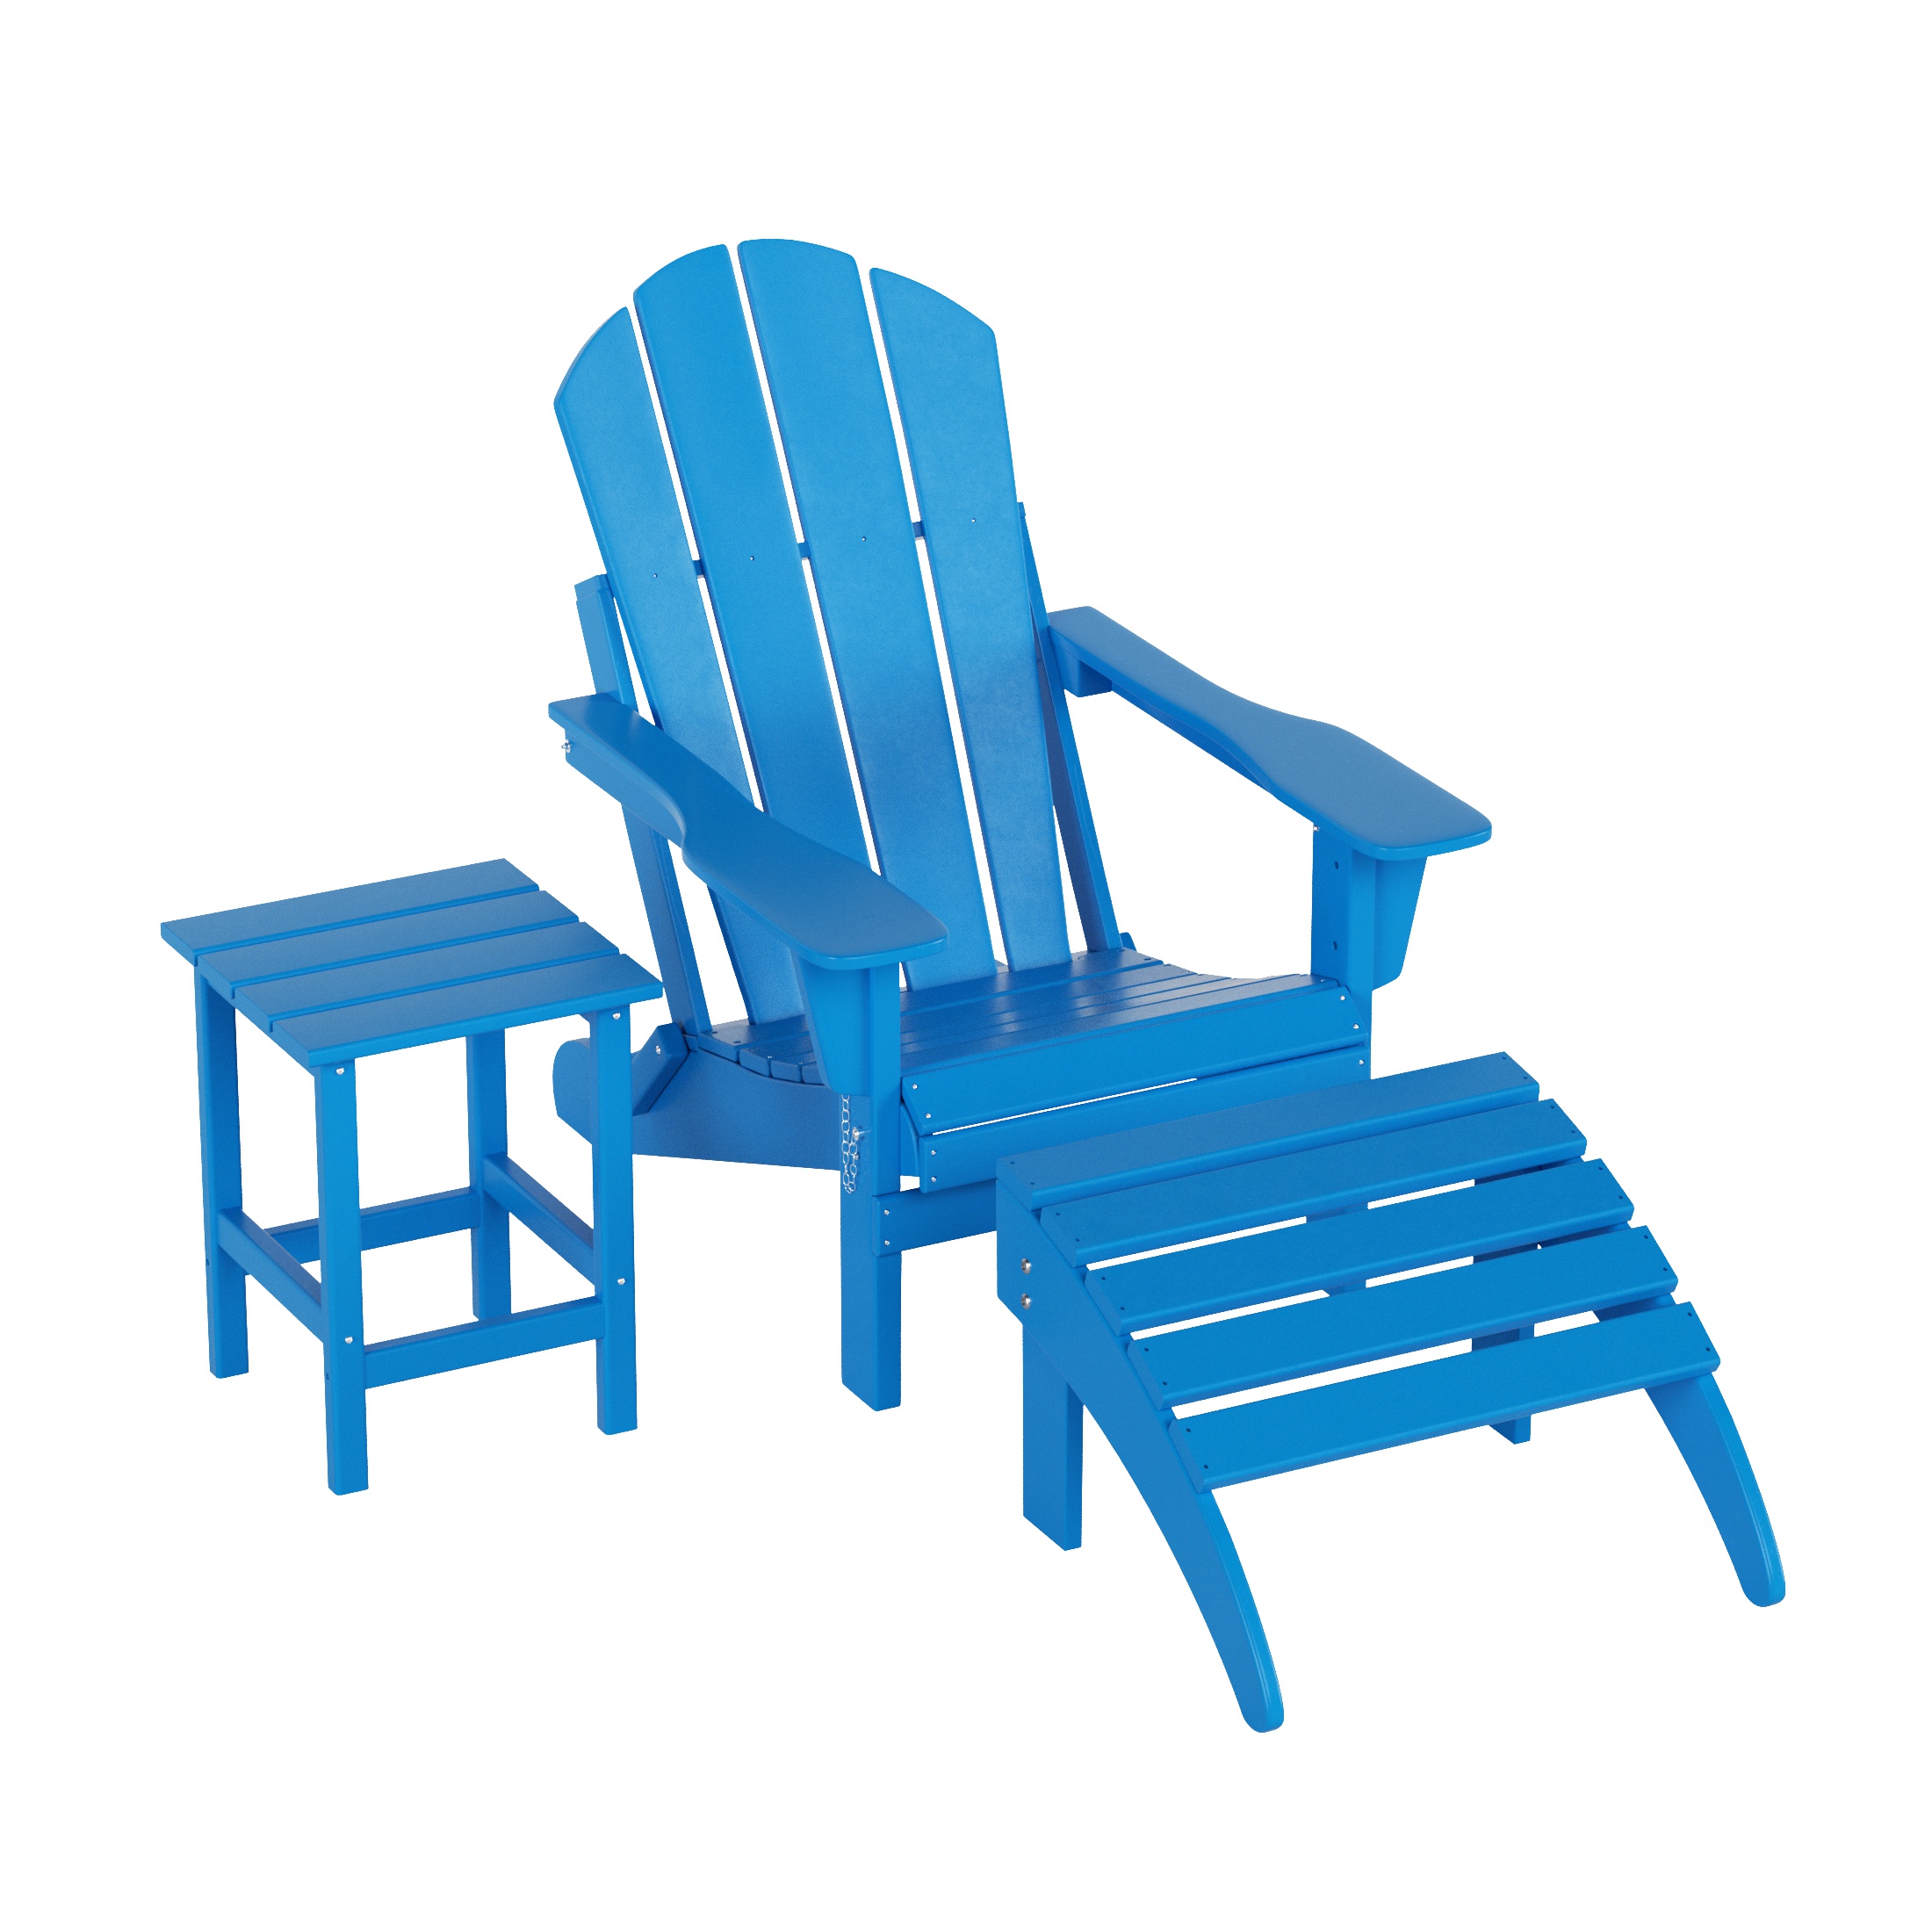 WestinTrends Malibu Outdoor Lounge Chairs, 3-Pieces Adirondack Chair Set with Ottoman and Side Table, All Weather Poly Lumber Patio Lawn Folding Chair for Outside Pool Garden Backyard, Pacific Blue - image 1 of 7